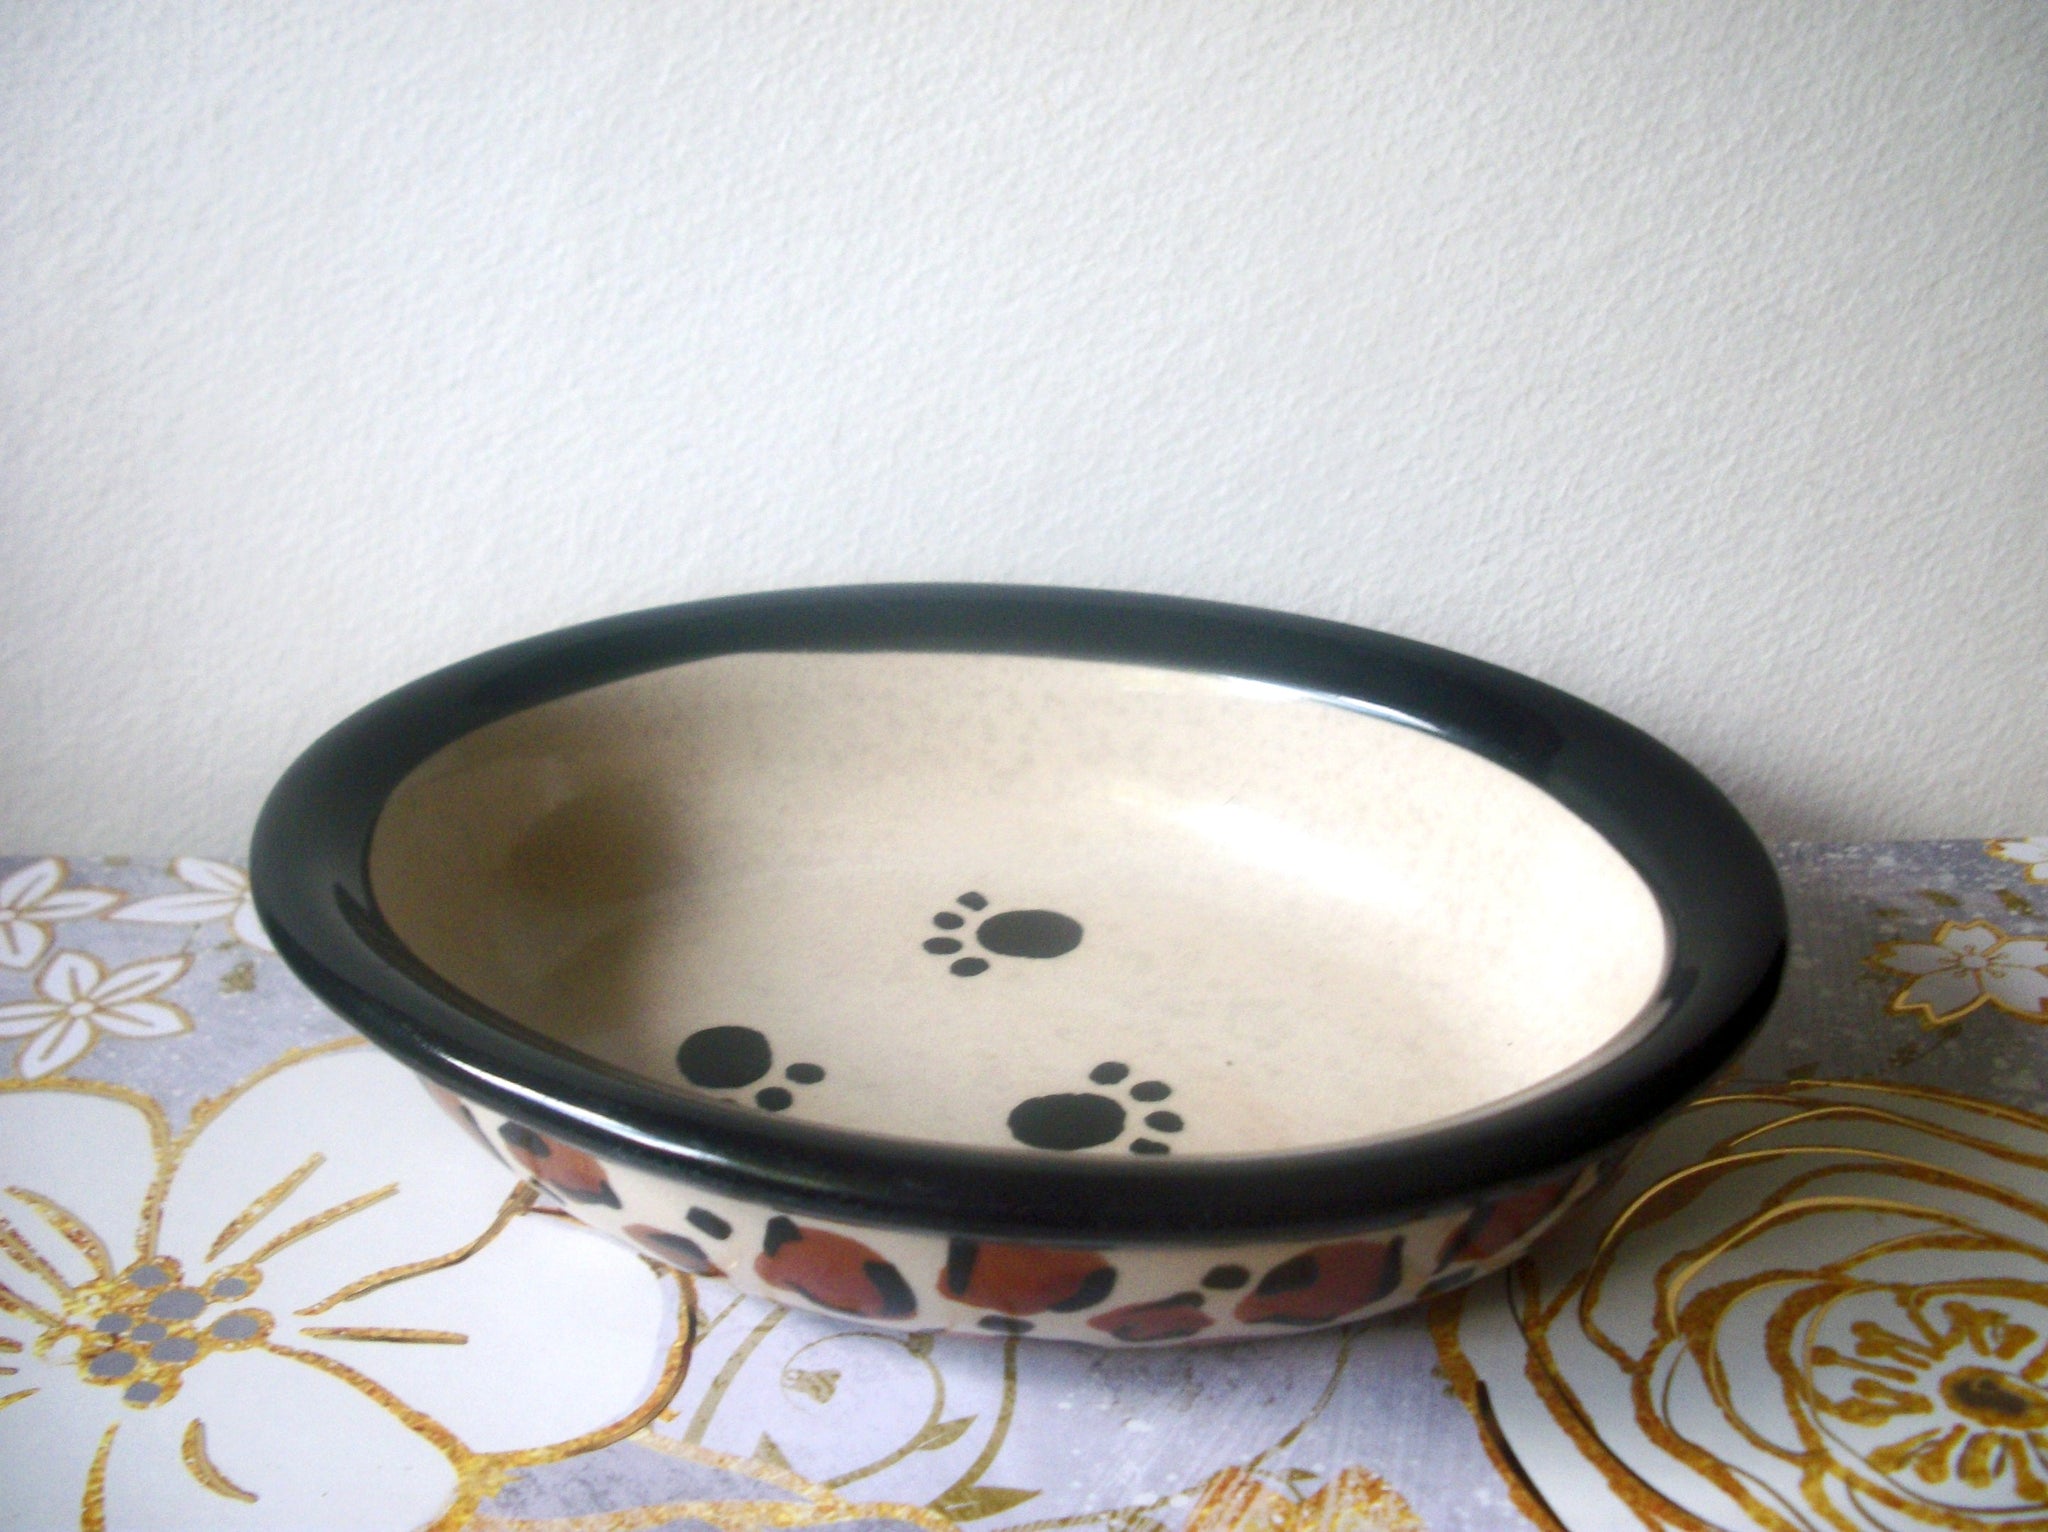 Food Dish Cats Dogs, Animal Print, Hand Painted, Oval Ceramic, 91617